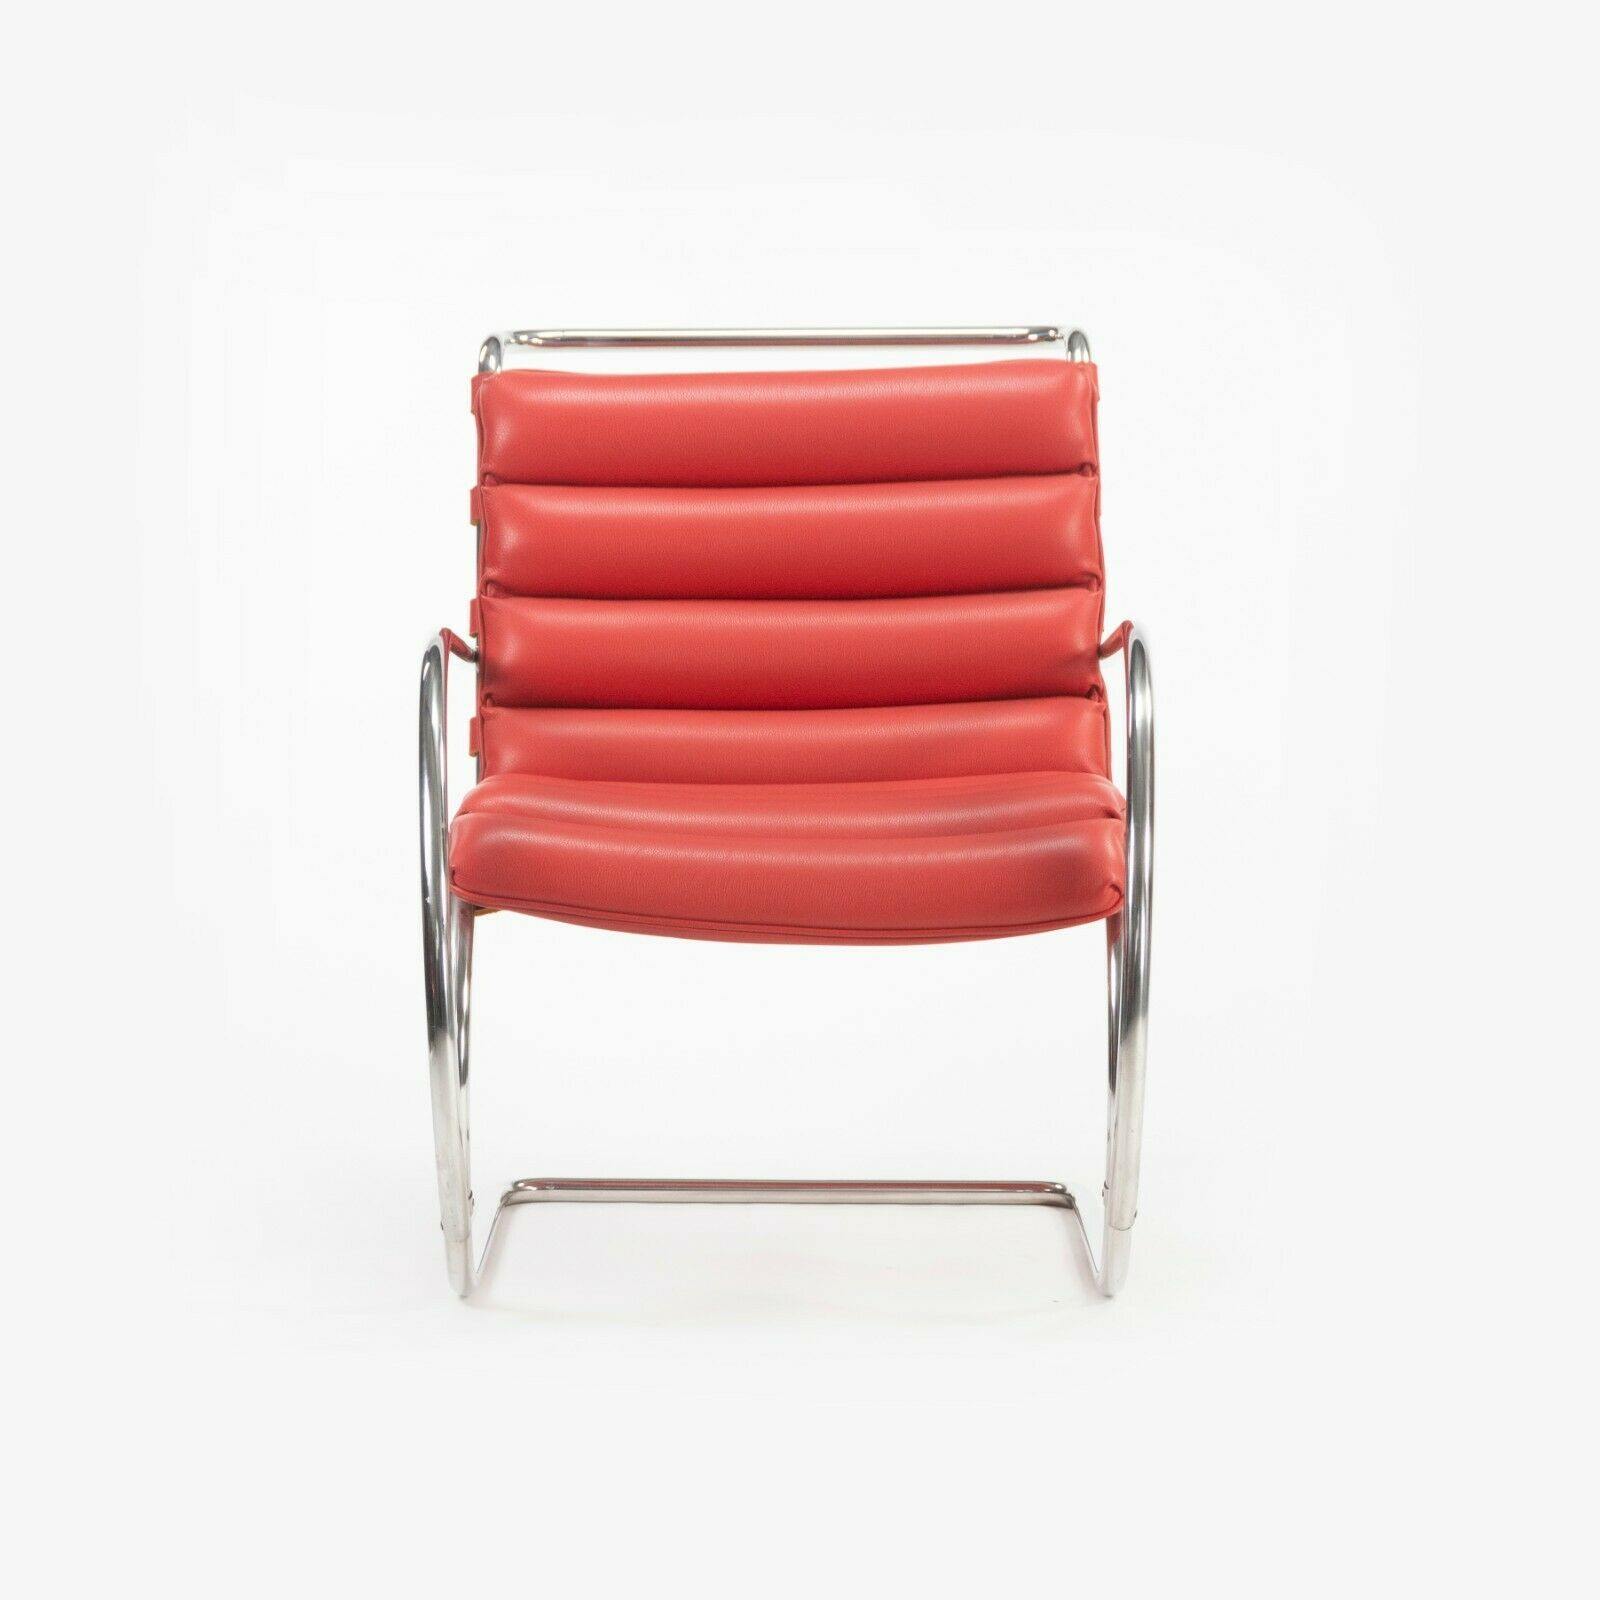 MR EO7M Lounge Chairs